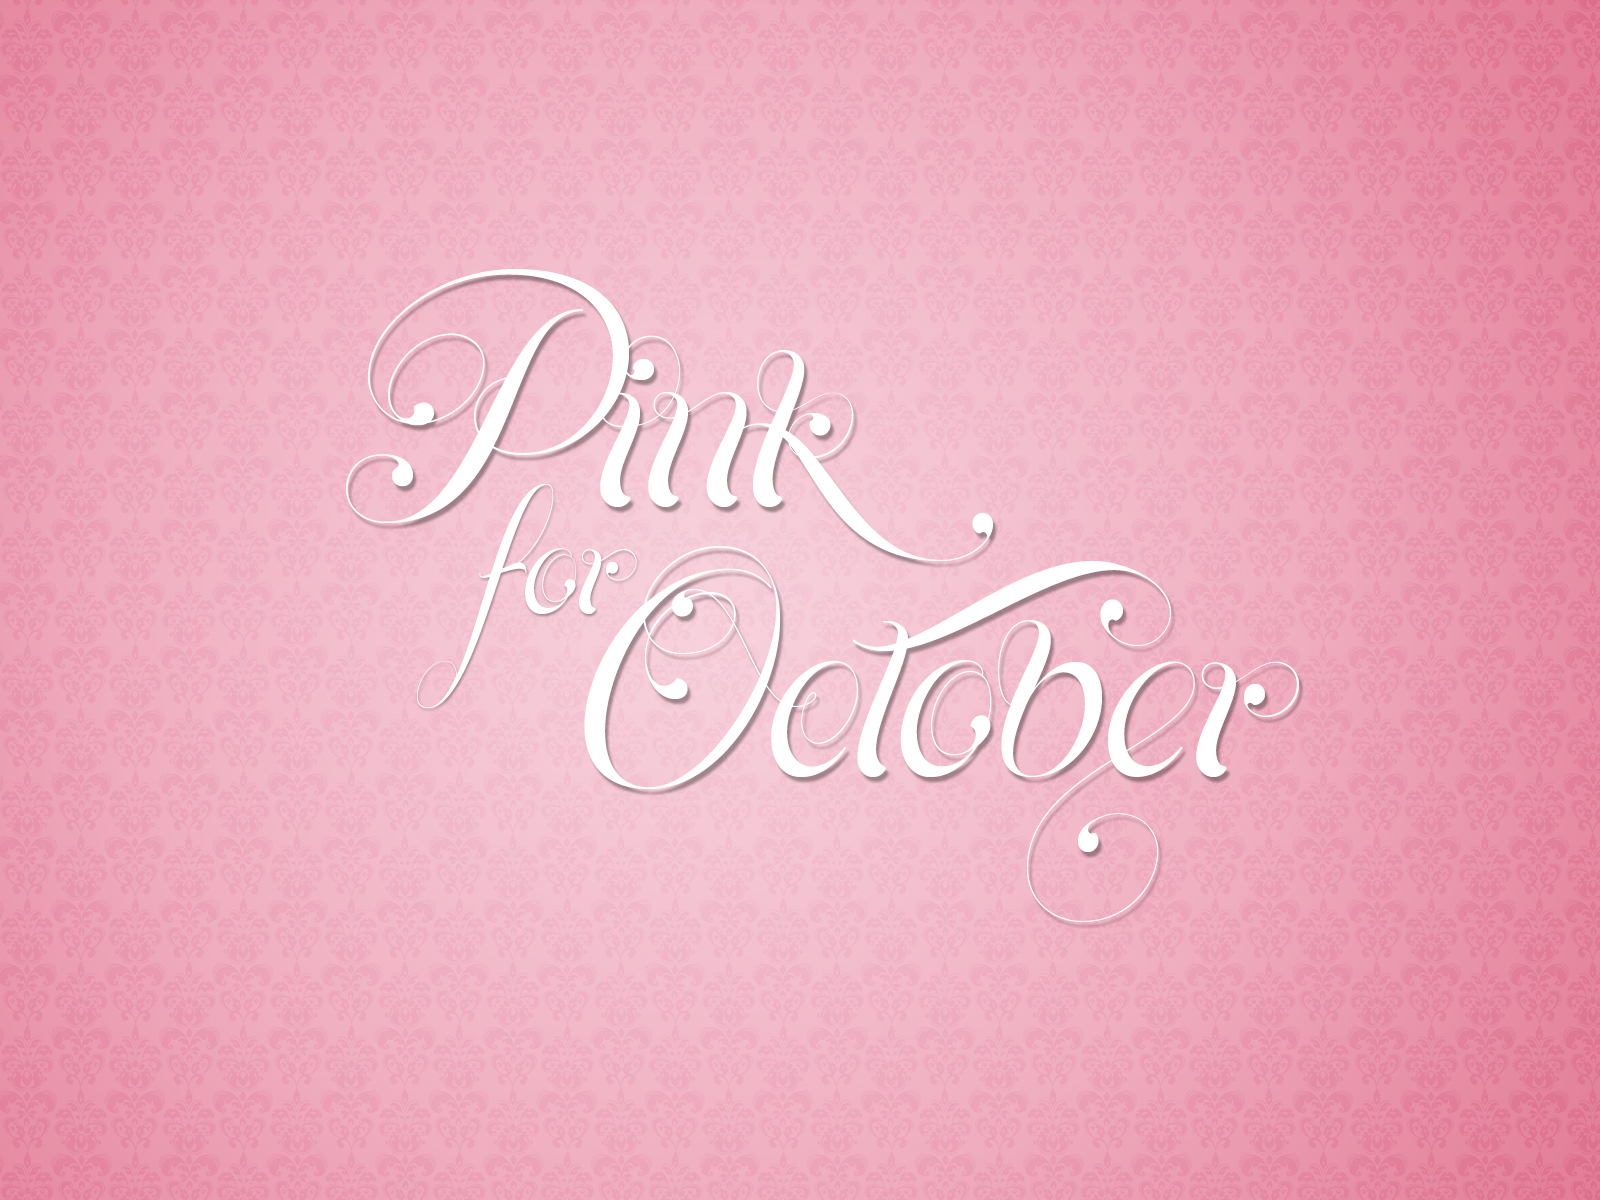 Breast Cancer Awareness Month Events